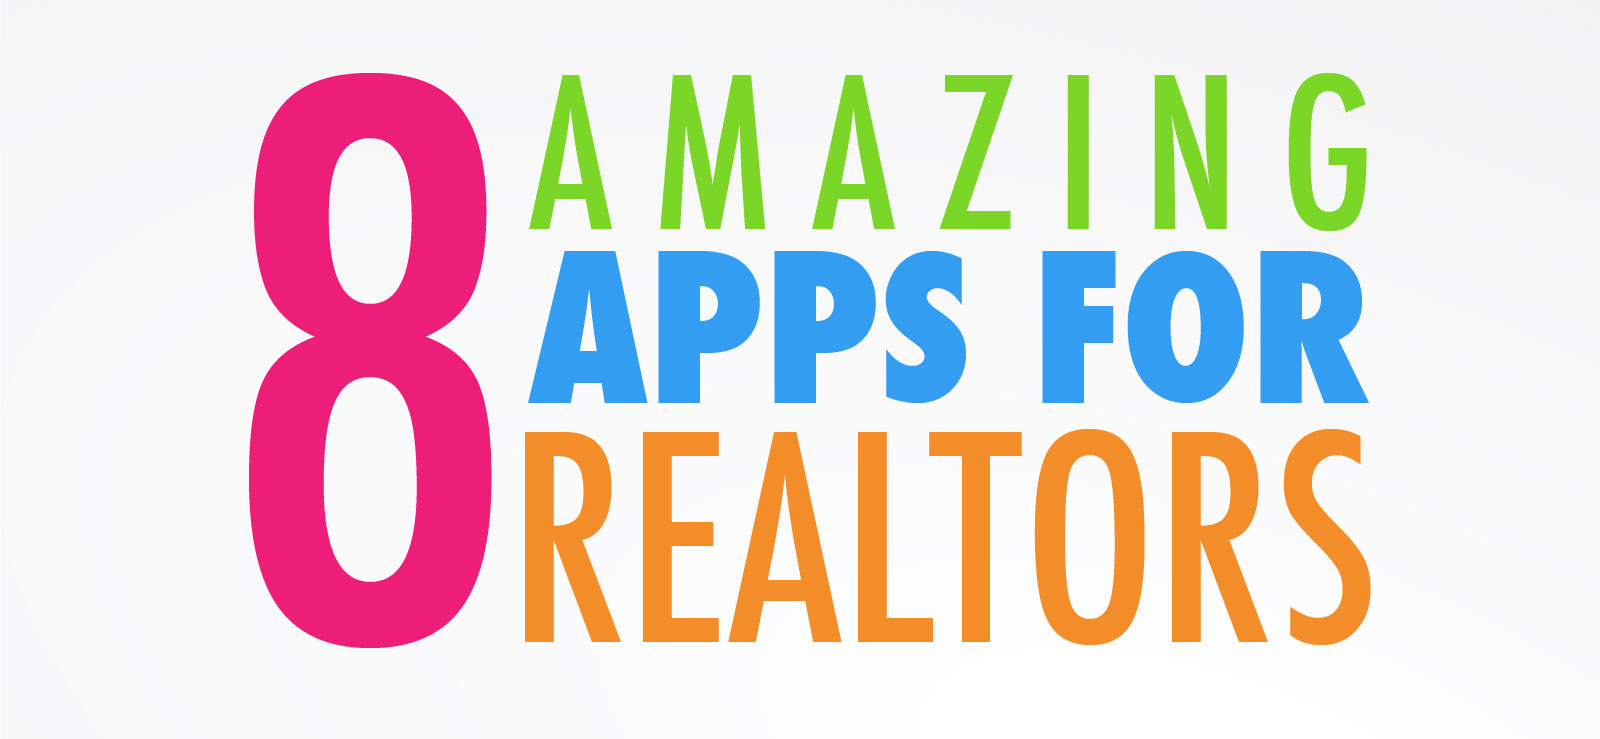 apps for real estate agent